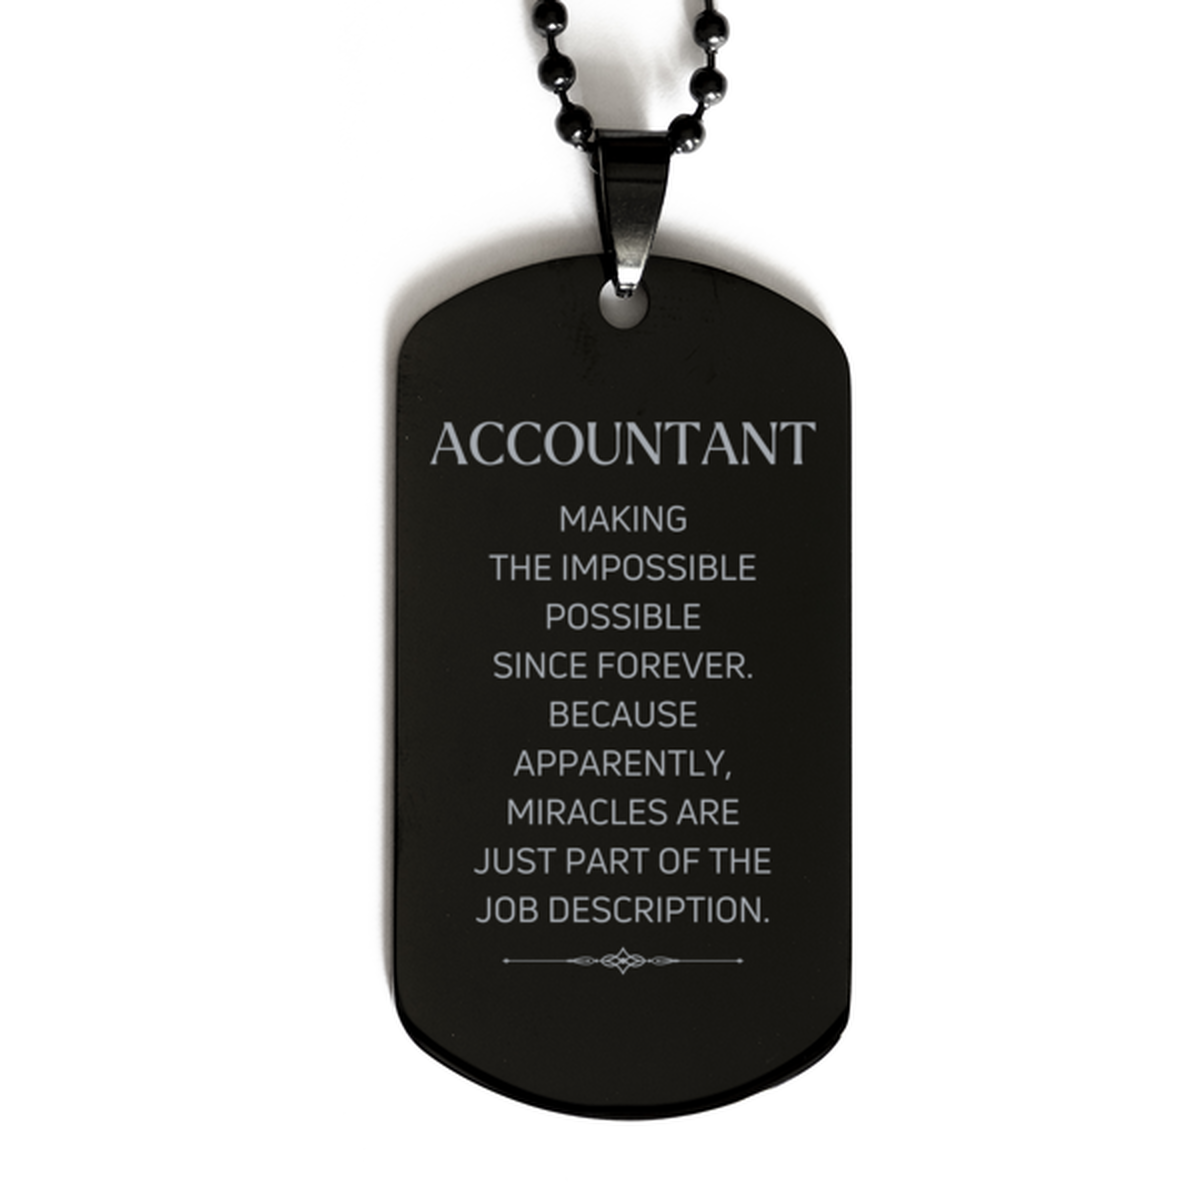 Funny Accountant Gifts, Miracles are just part of the job description, Inspirational Birthday Black Dog Tag For Accountant, Men, Women, Coworkers, Friends, Boss